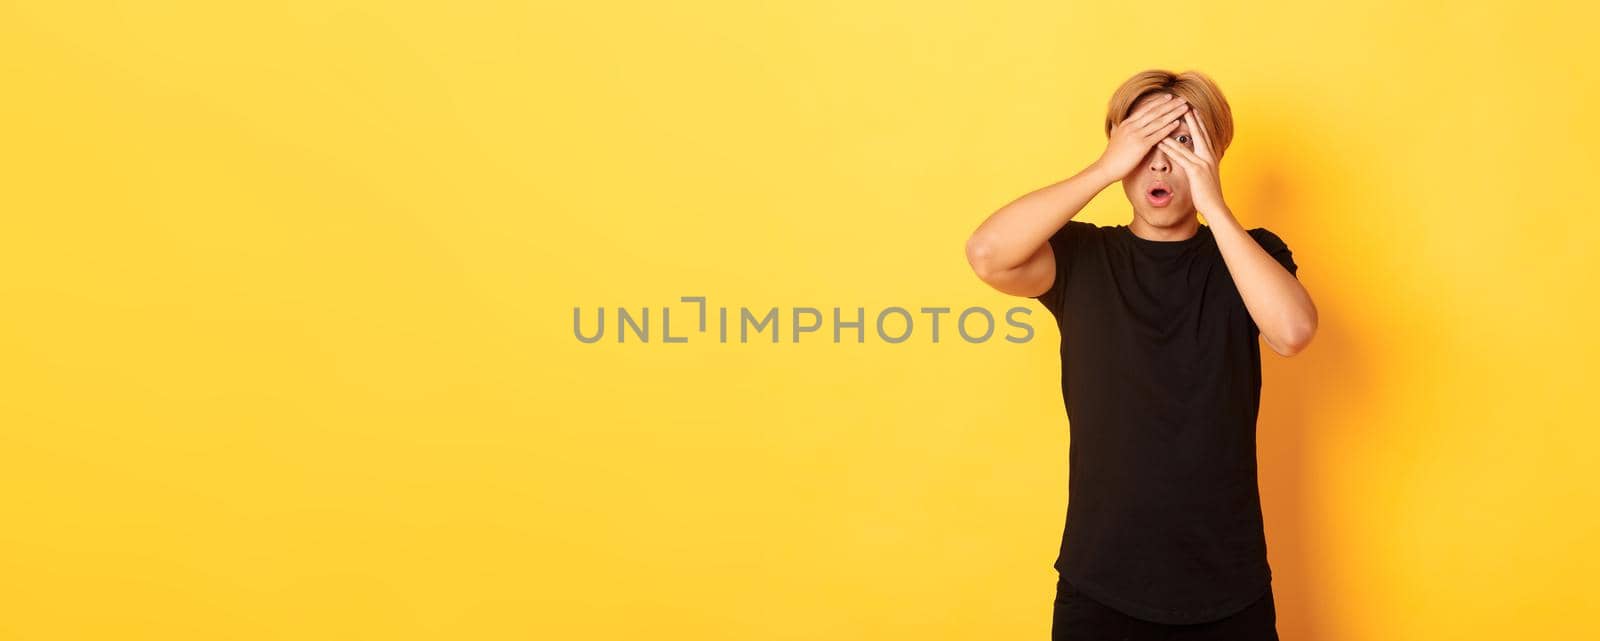 Portrait of embarrassed asian guy with blond hair, gasping startled and shut eyes, peeking through fingers, yellow background.